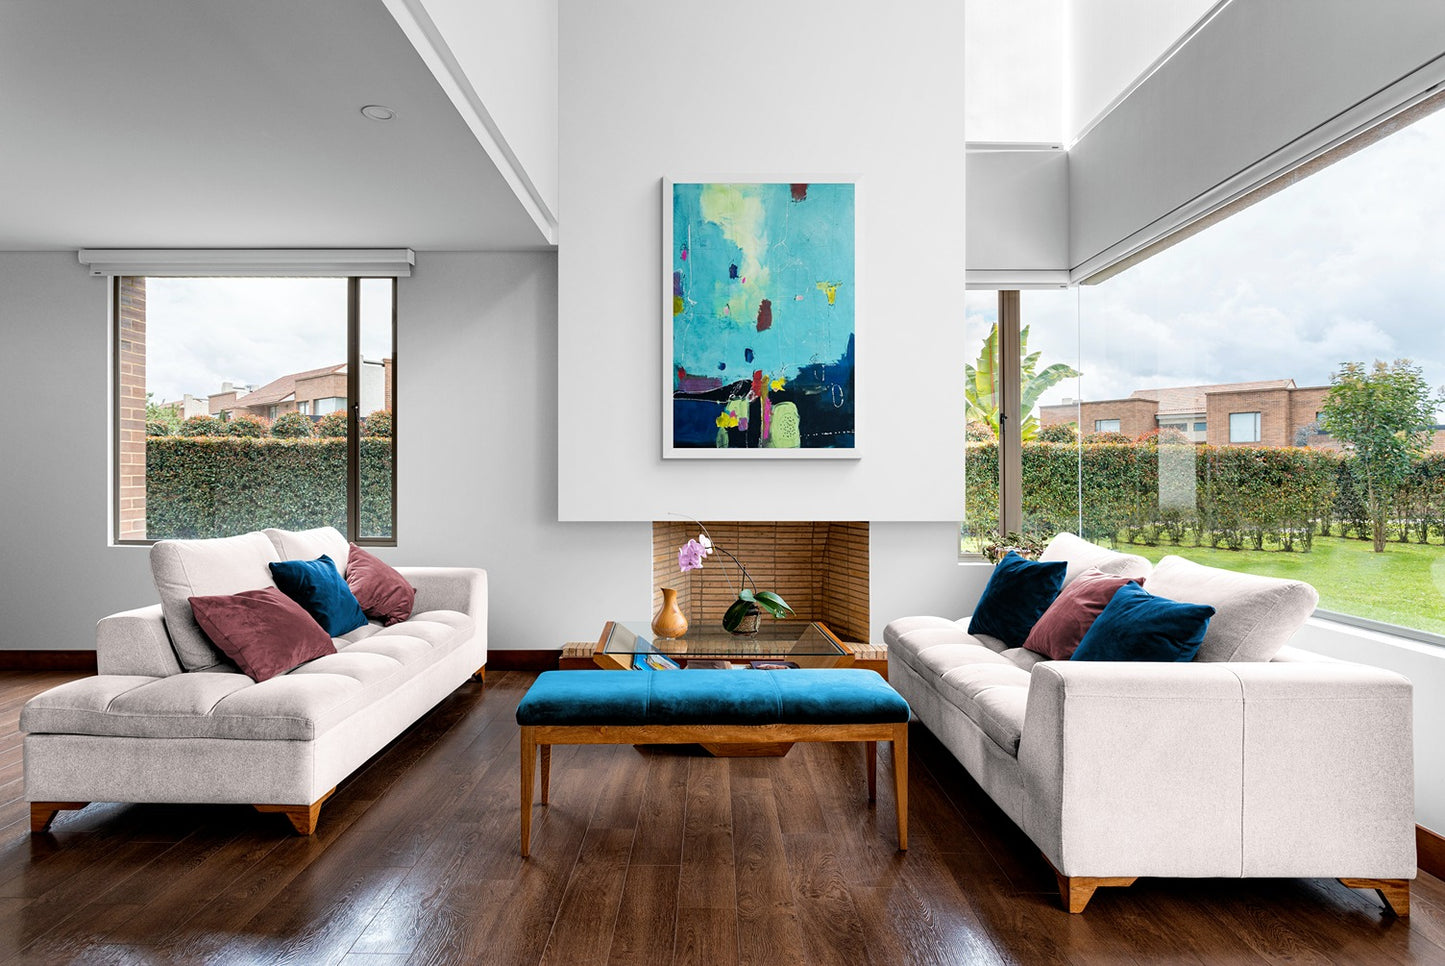 Rasavatta large wall art complements a comfy living room with serene garden views, adding elegance and tranquility to the space.